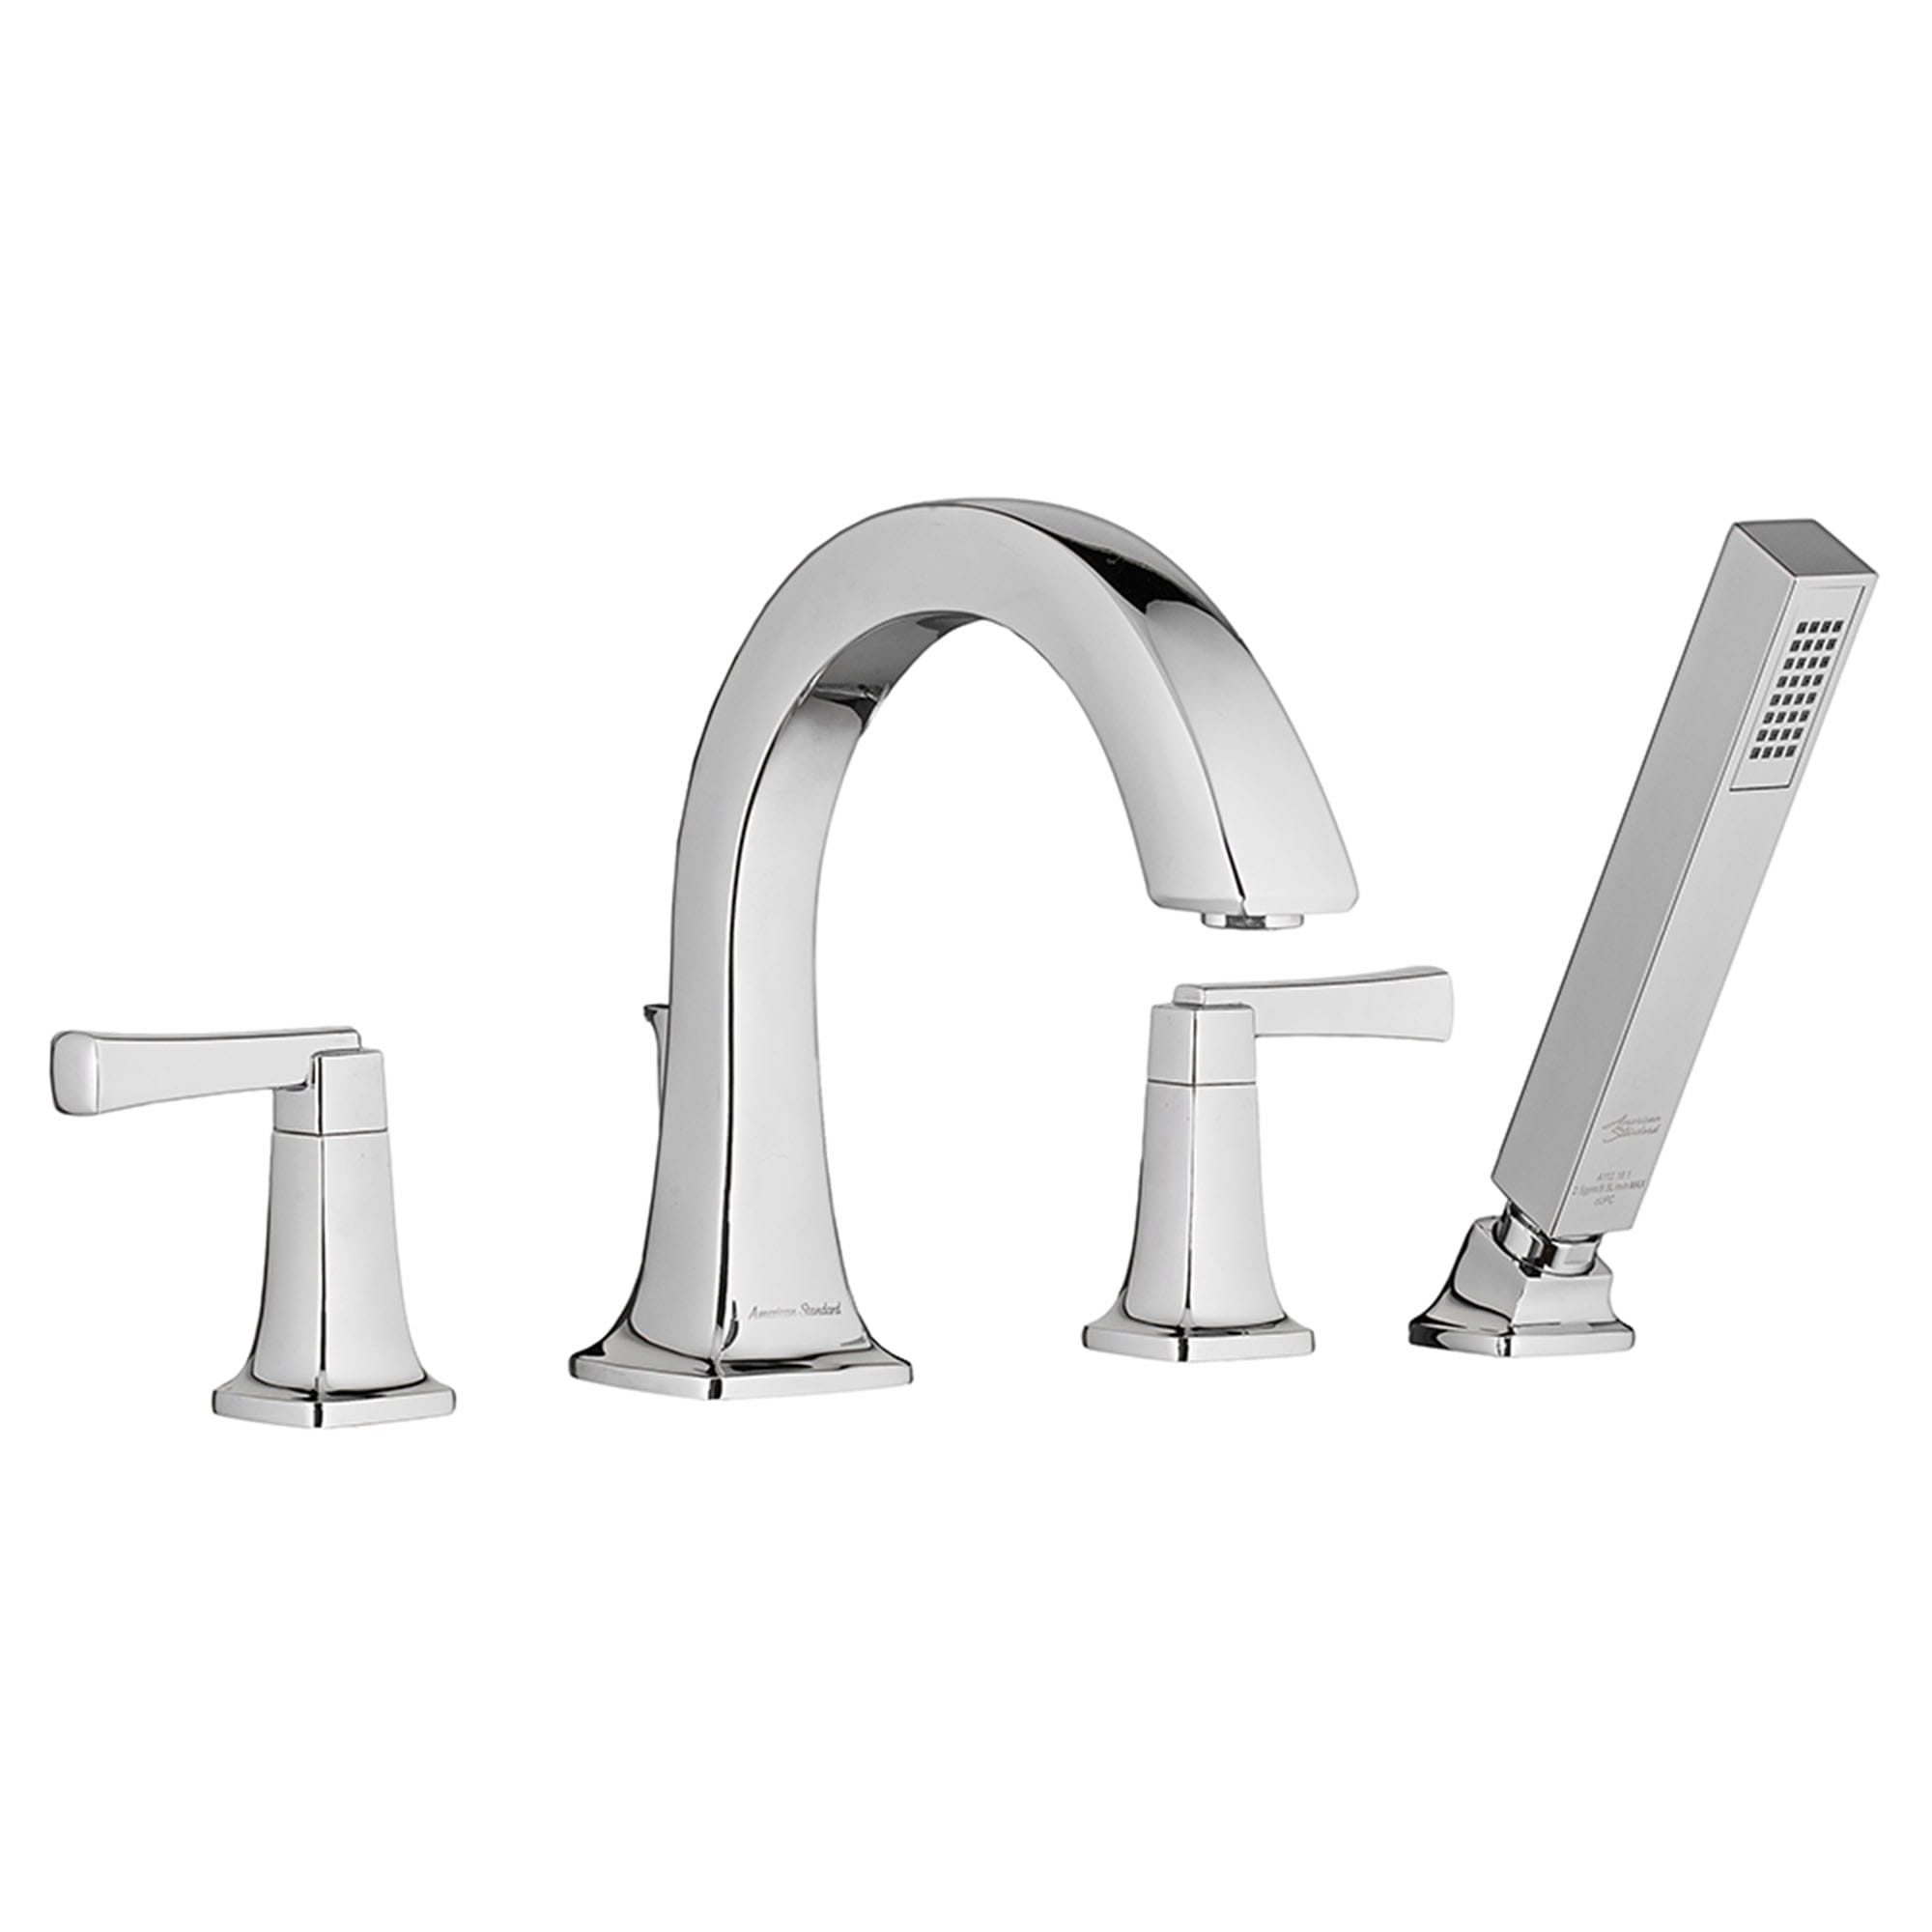 Townsend Bathtub Faucet With Lever Handles and Personal Shower for Flash Rough In Valve CHROME